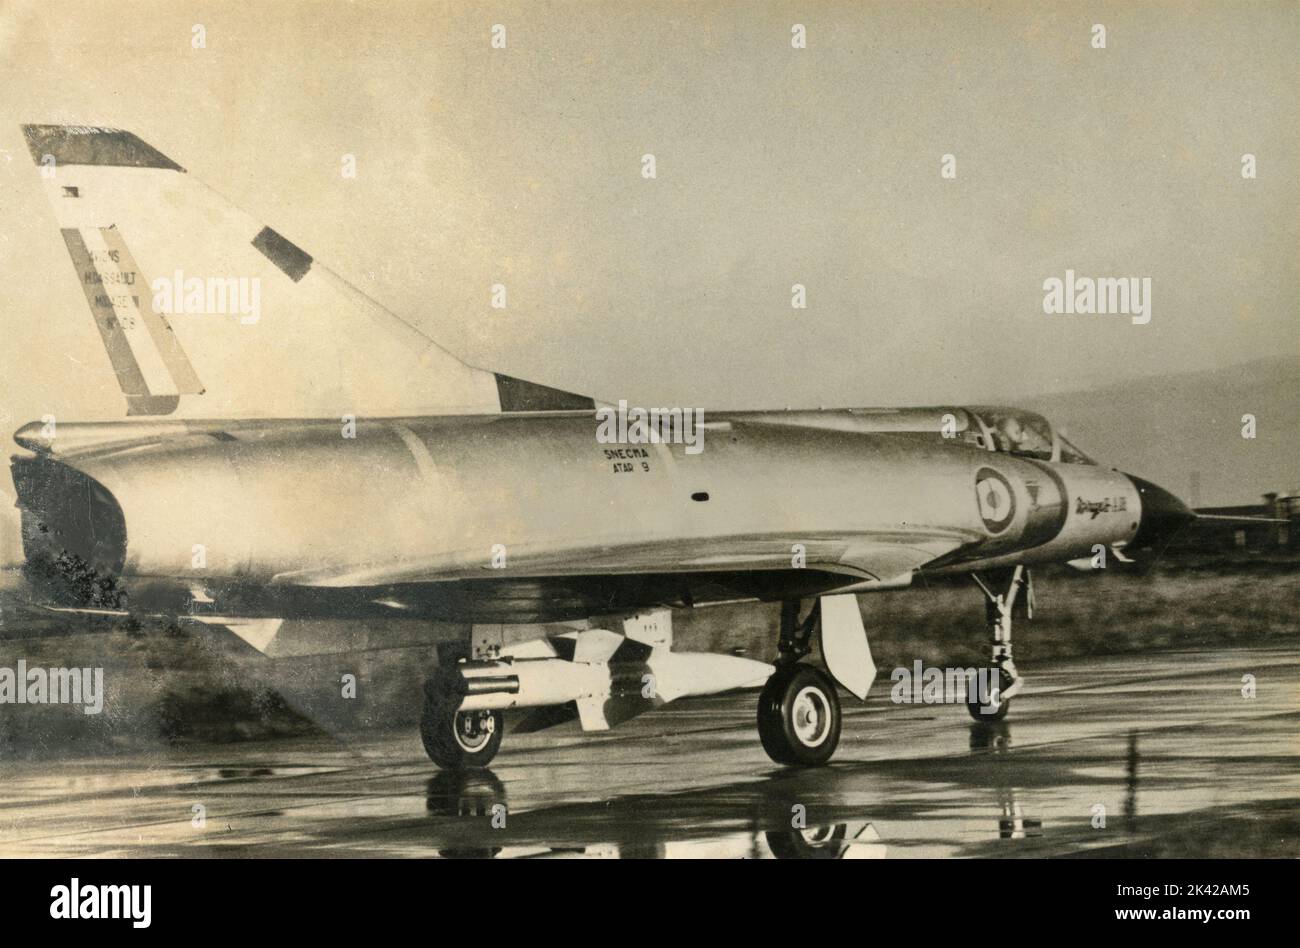 French single motor Snecma Atar 09 fighter aircraft Dassault Mirage of the Italian Air Force, 1970s Stock Photo